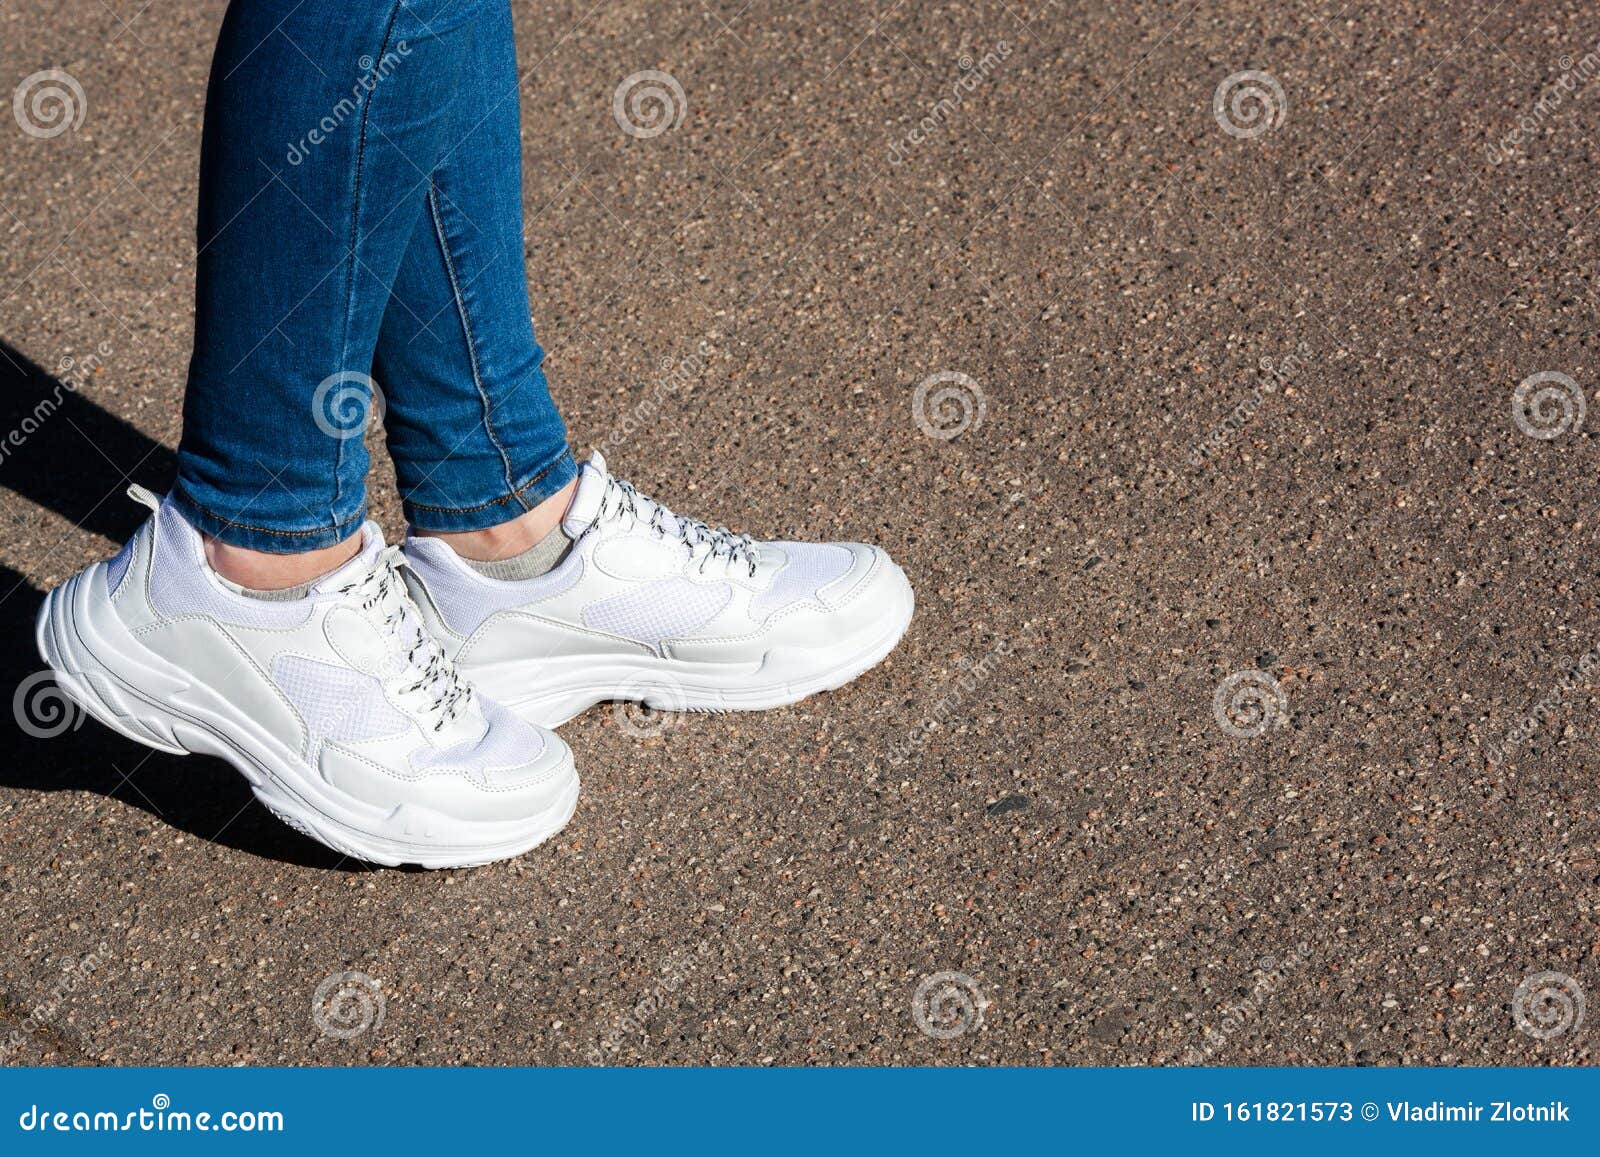 Women`s Legs in White Sports Running Shoes Stock Image - Image of ...